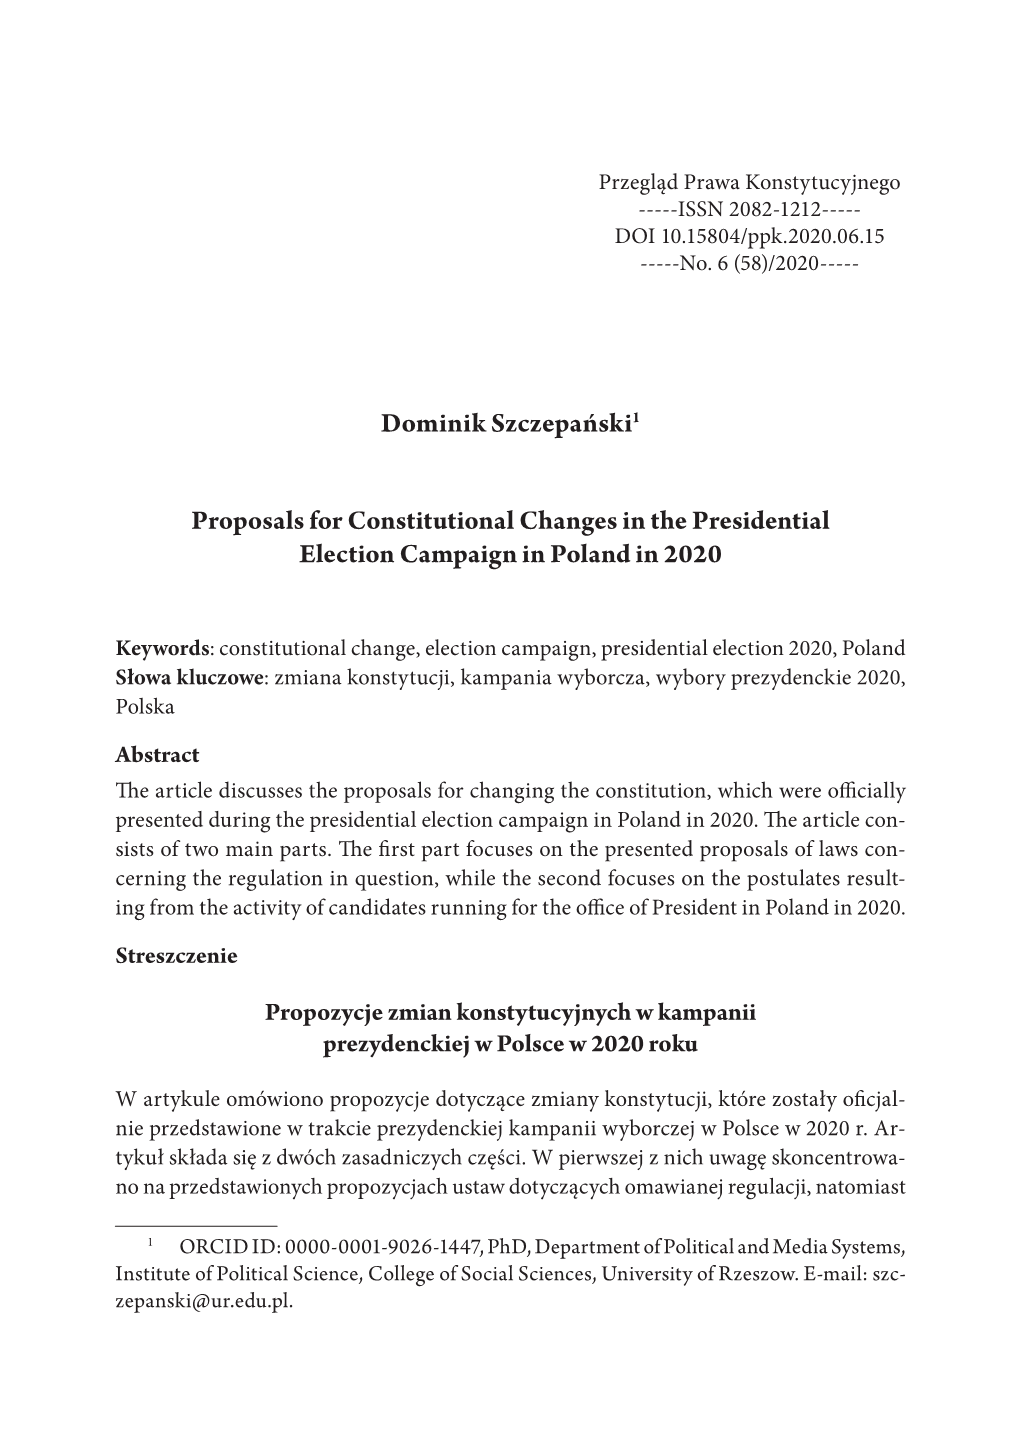 Dominik Szczepański1 Proposals for Constitutional Changes in the Presidential Election Campaign in Poland in 2020